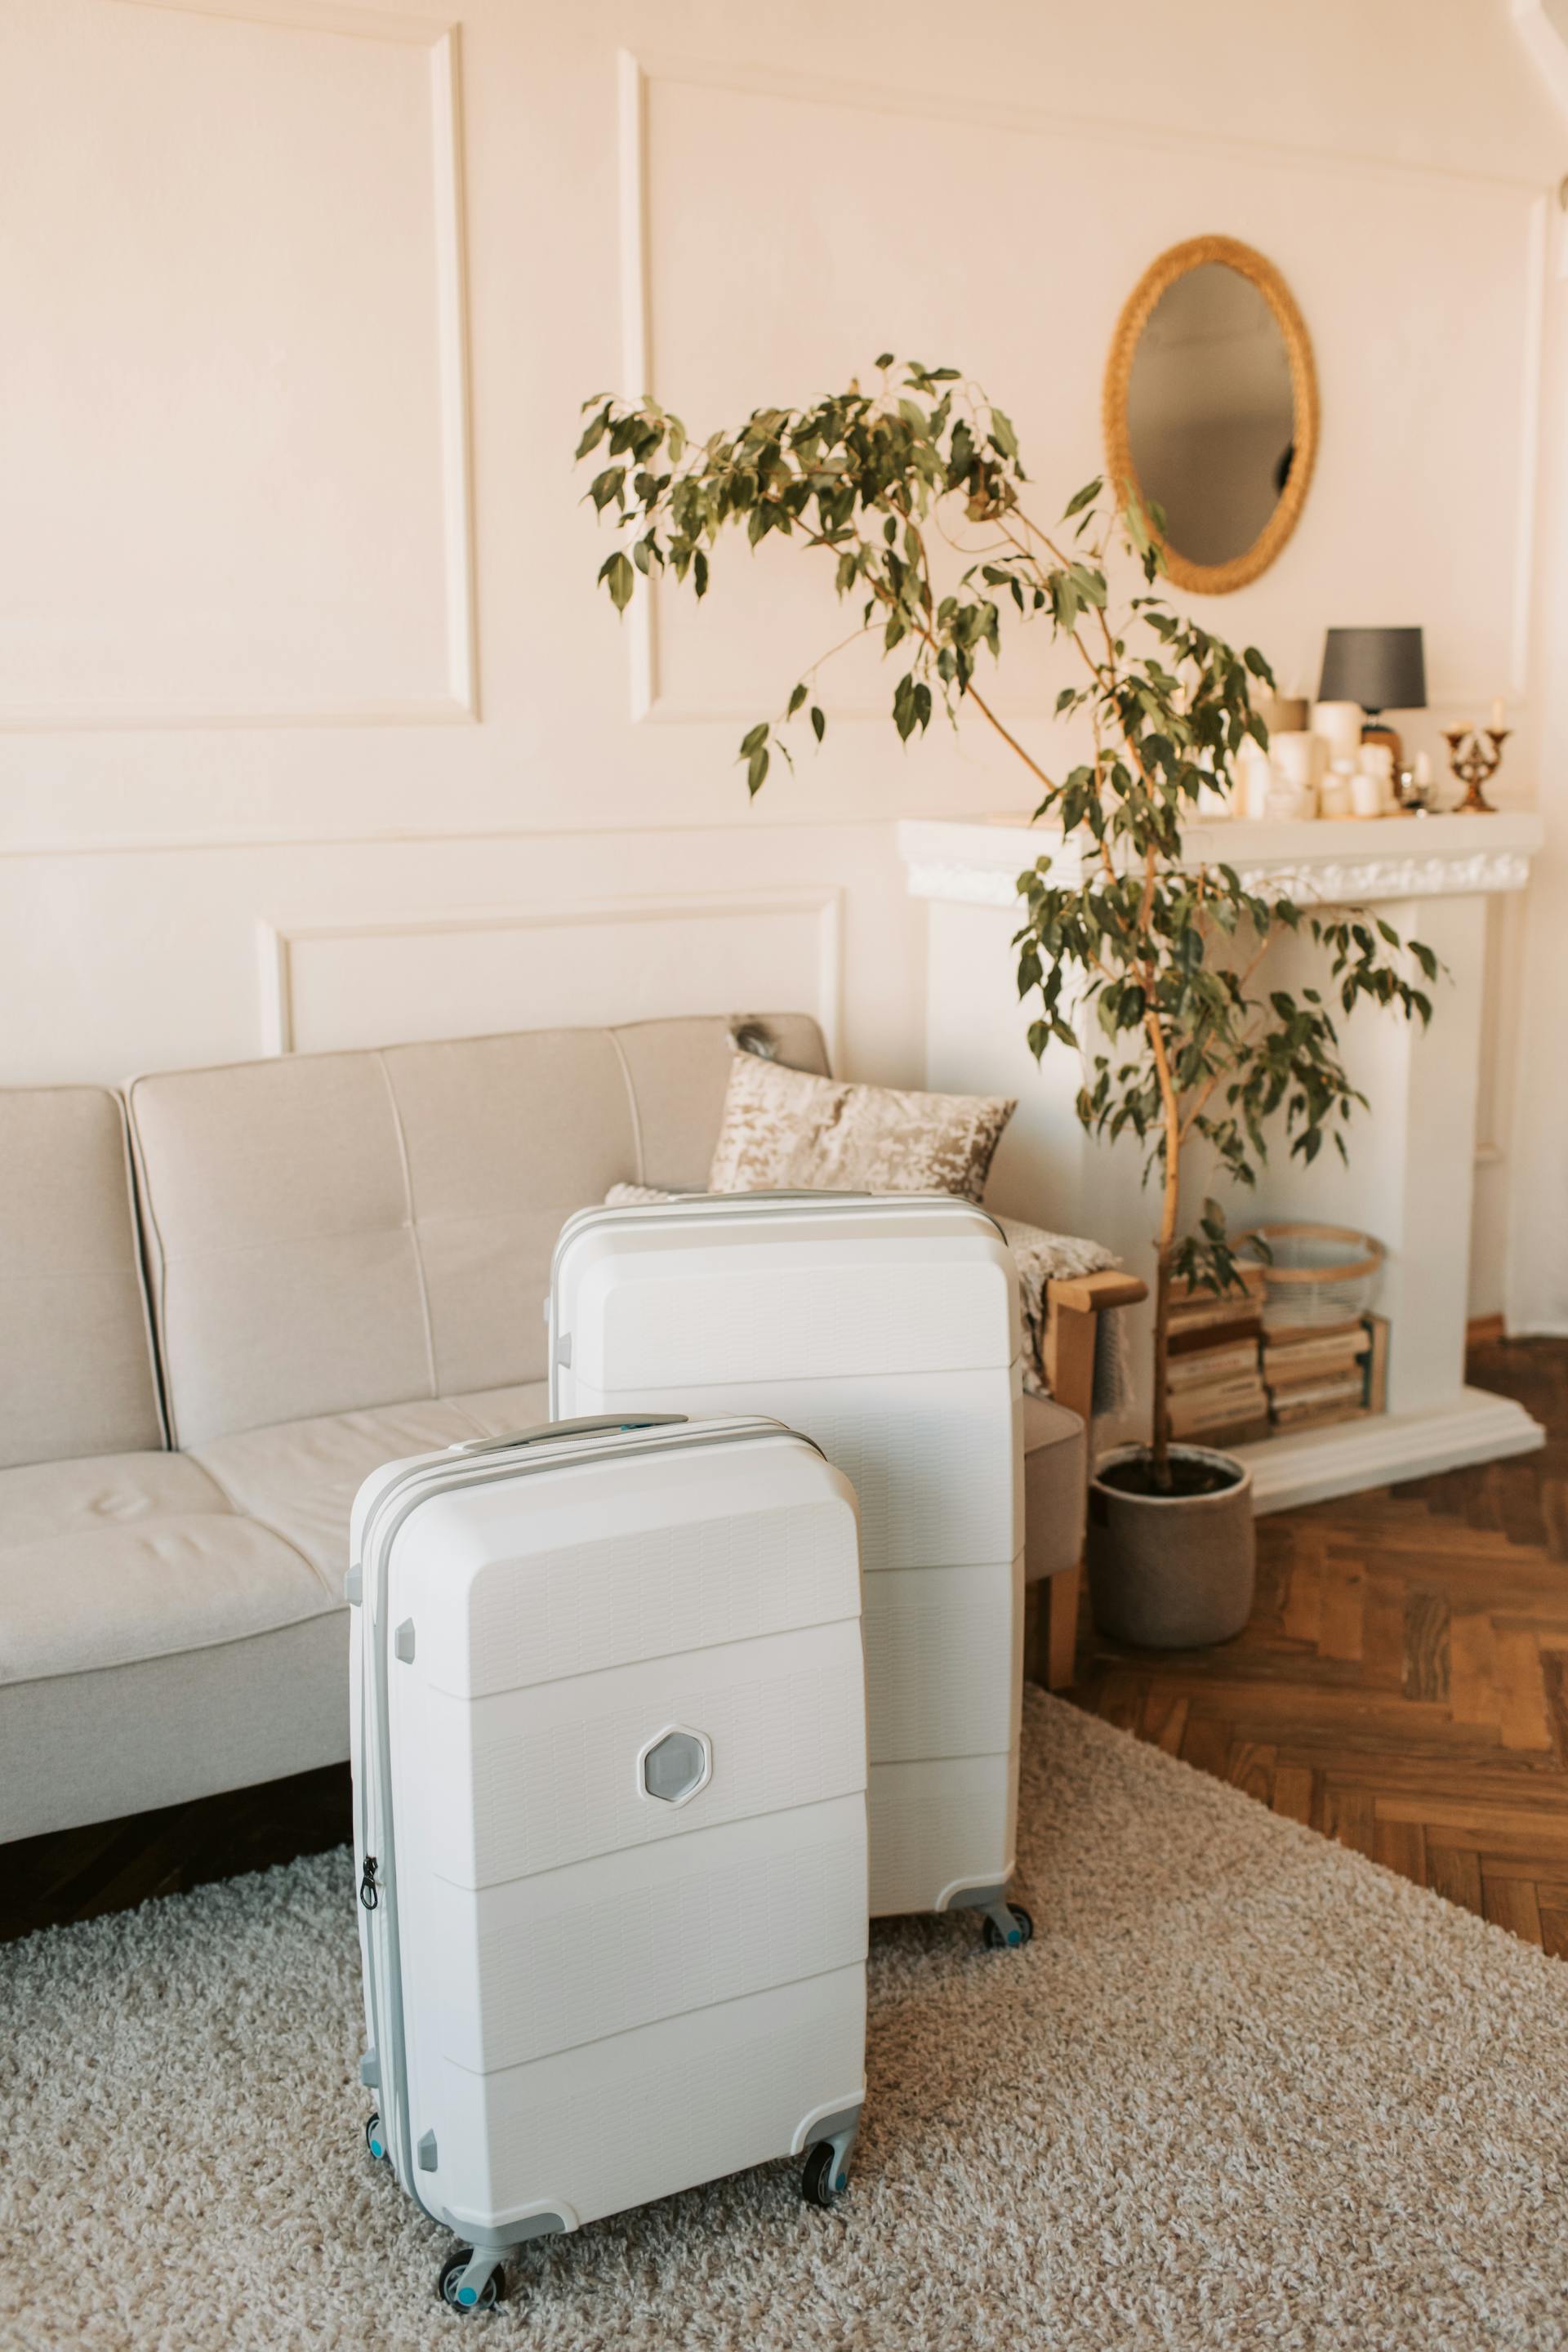 White suitcases in a living room | Source: Pexels